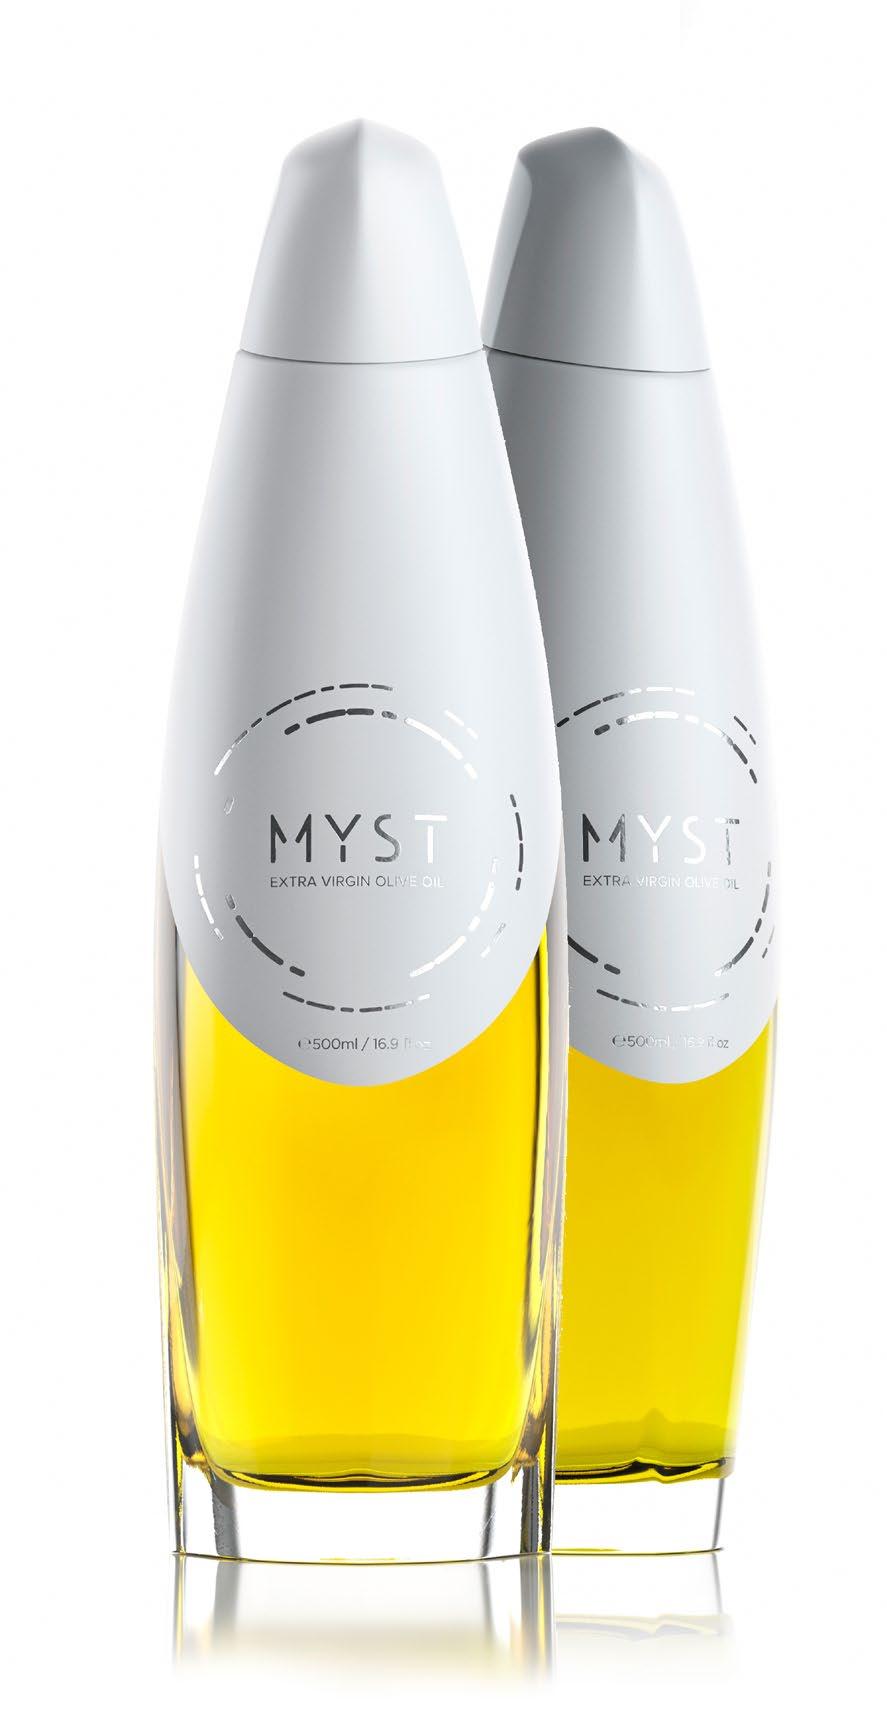 MYST PURE MYST PURE contains 500 ml gourmet extra virgin olive oil, cultivated in the historic olive groves of Olympus.